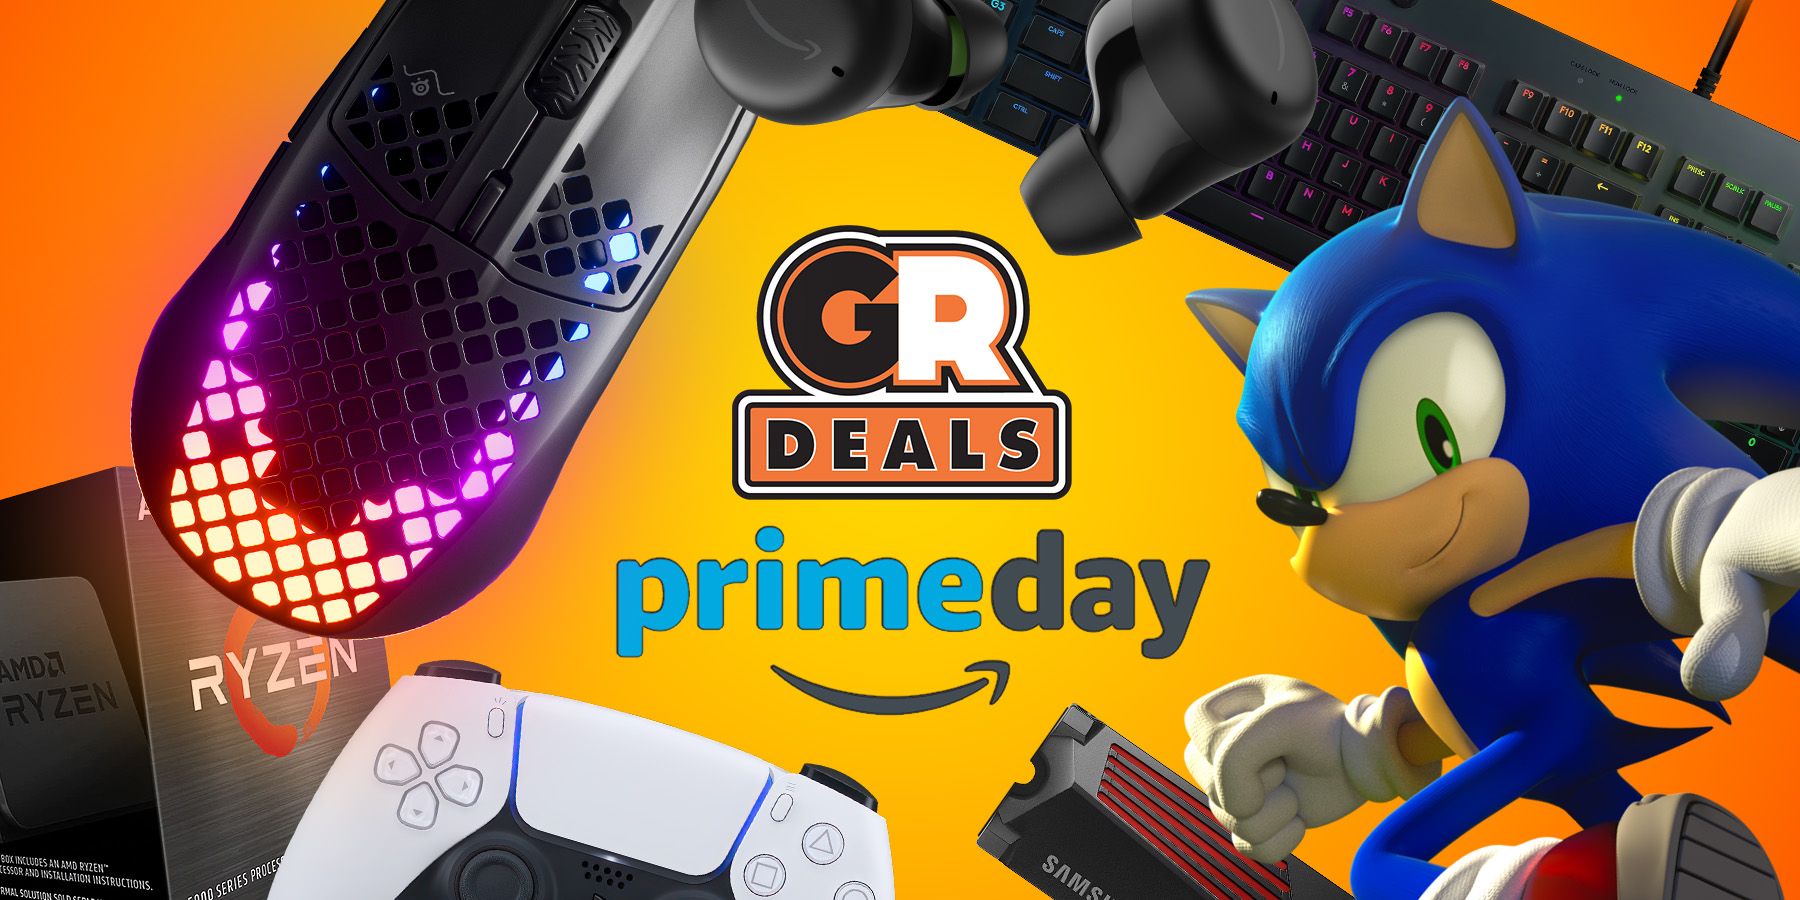 Twitch Prime Gaming Deals Prime Day 2020: the Best Deals We Expect